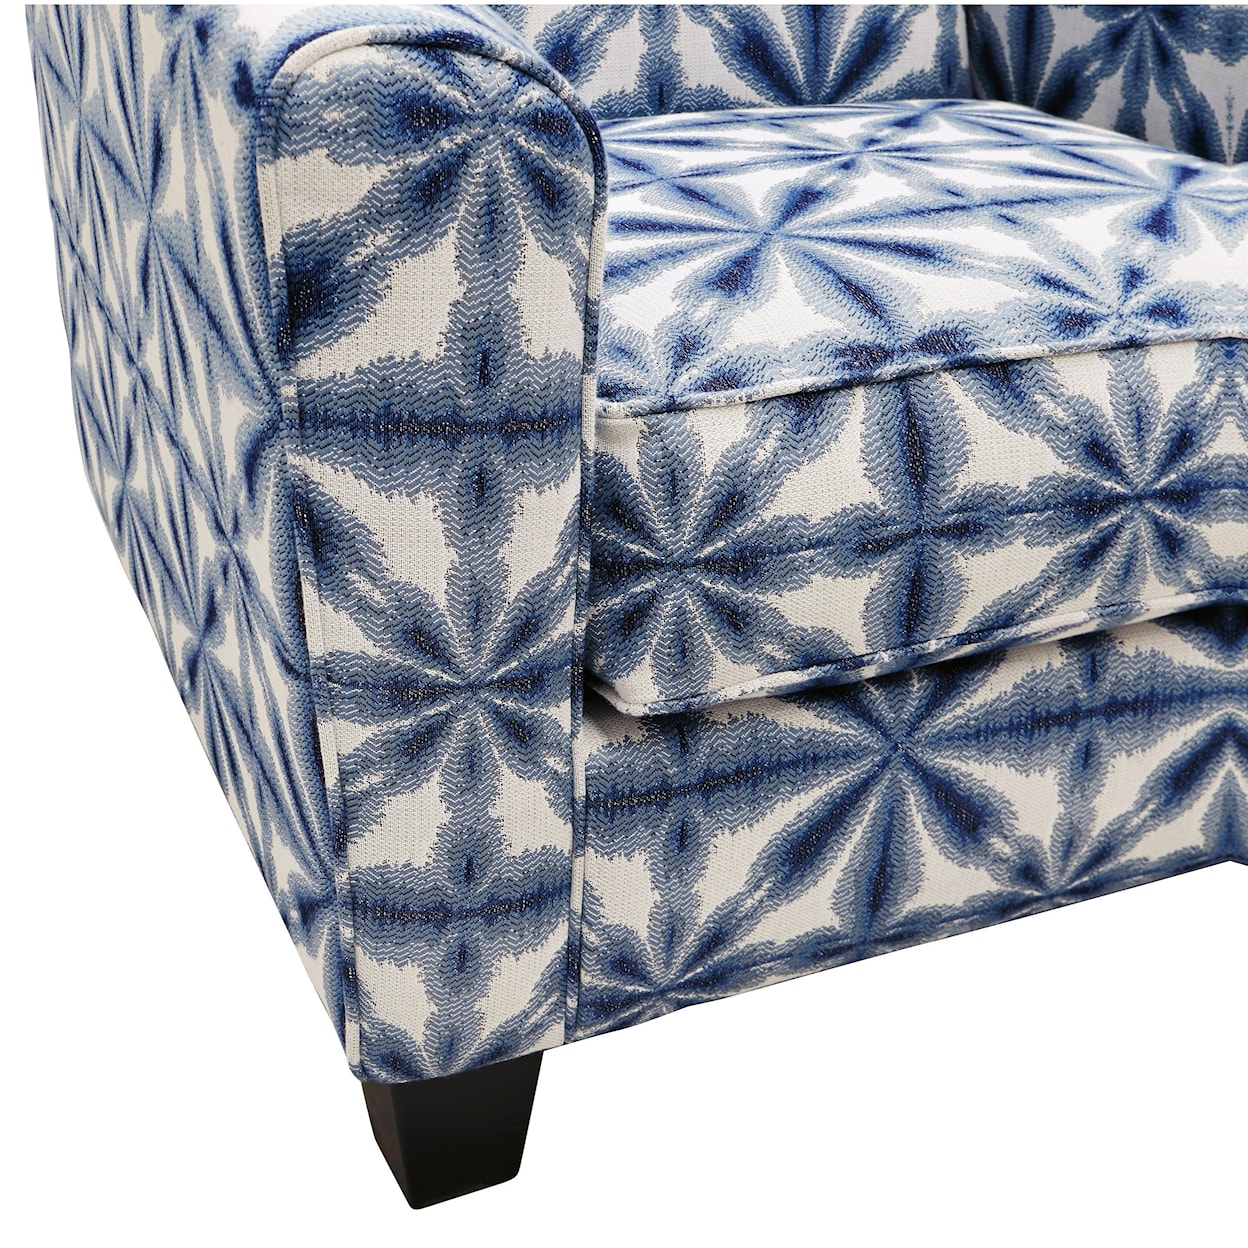 Ashley Furniture Benchcraft Kiessel Nuvella Accent Chair